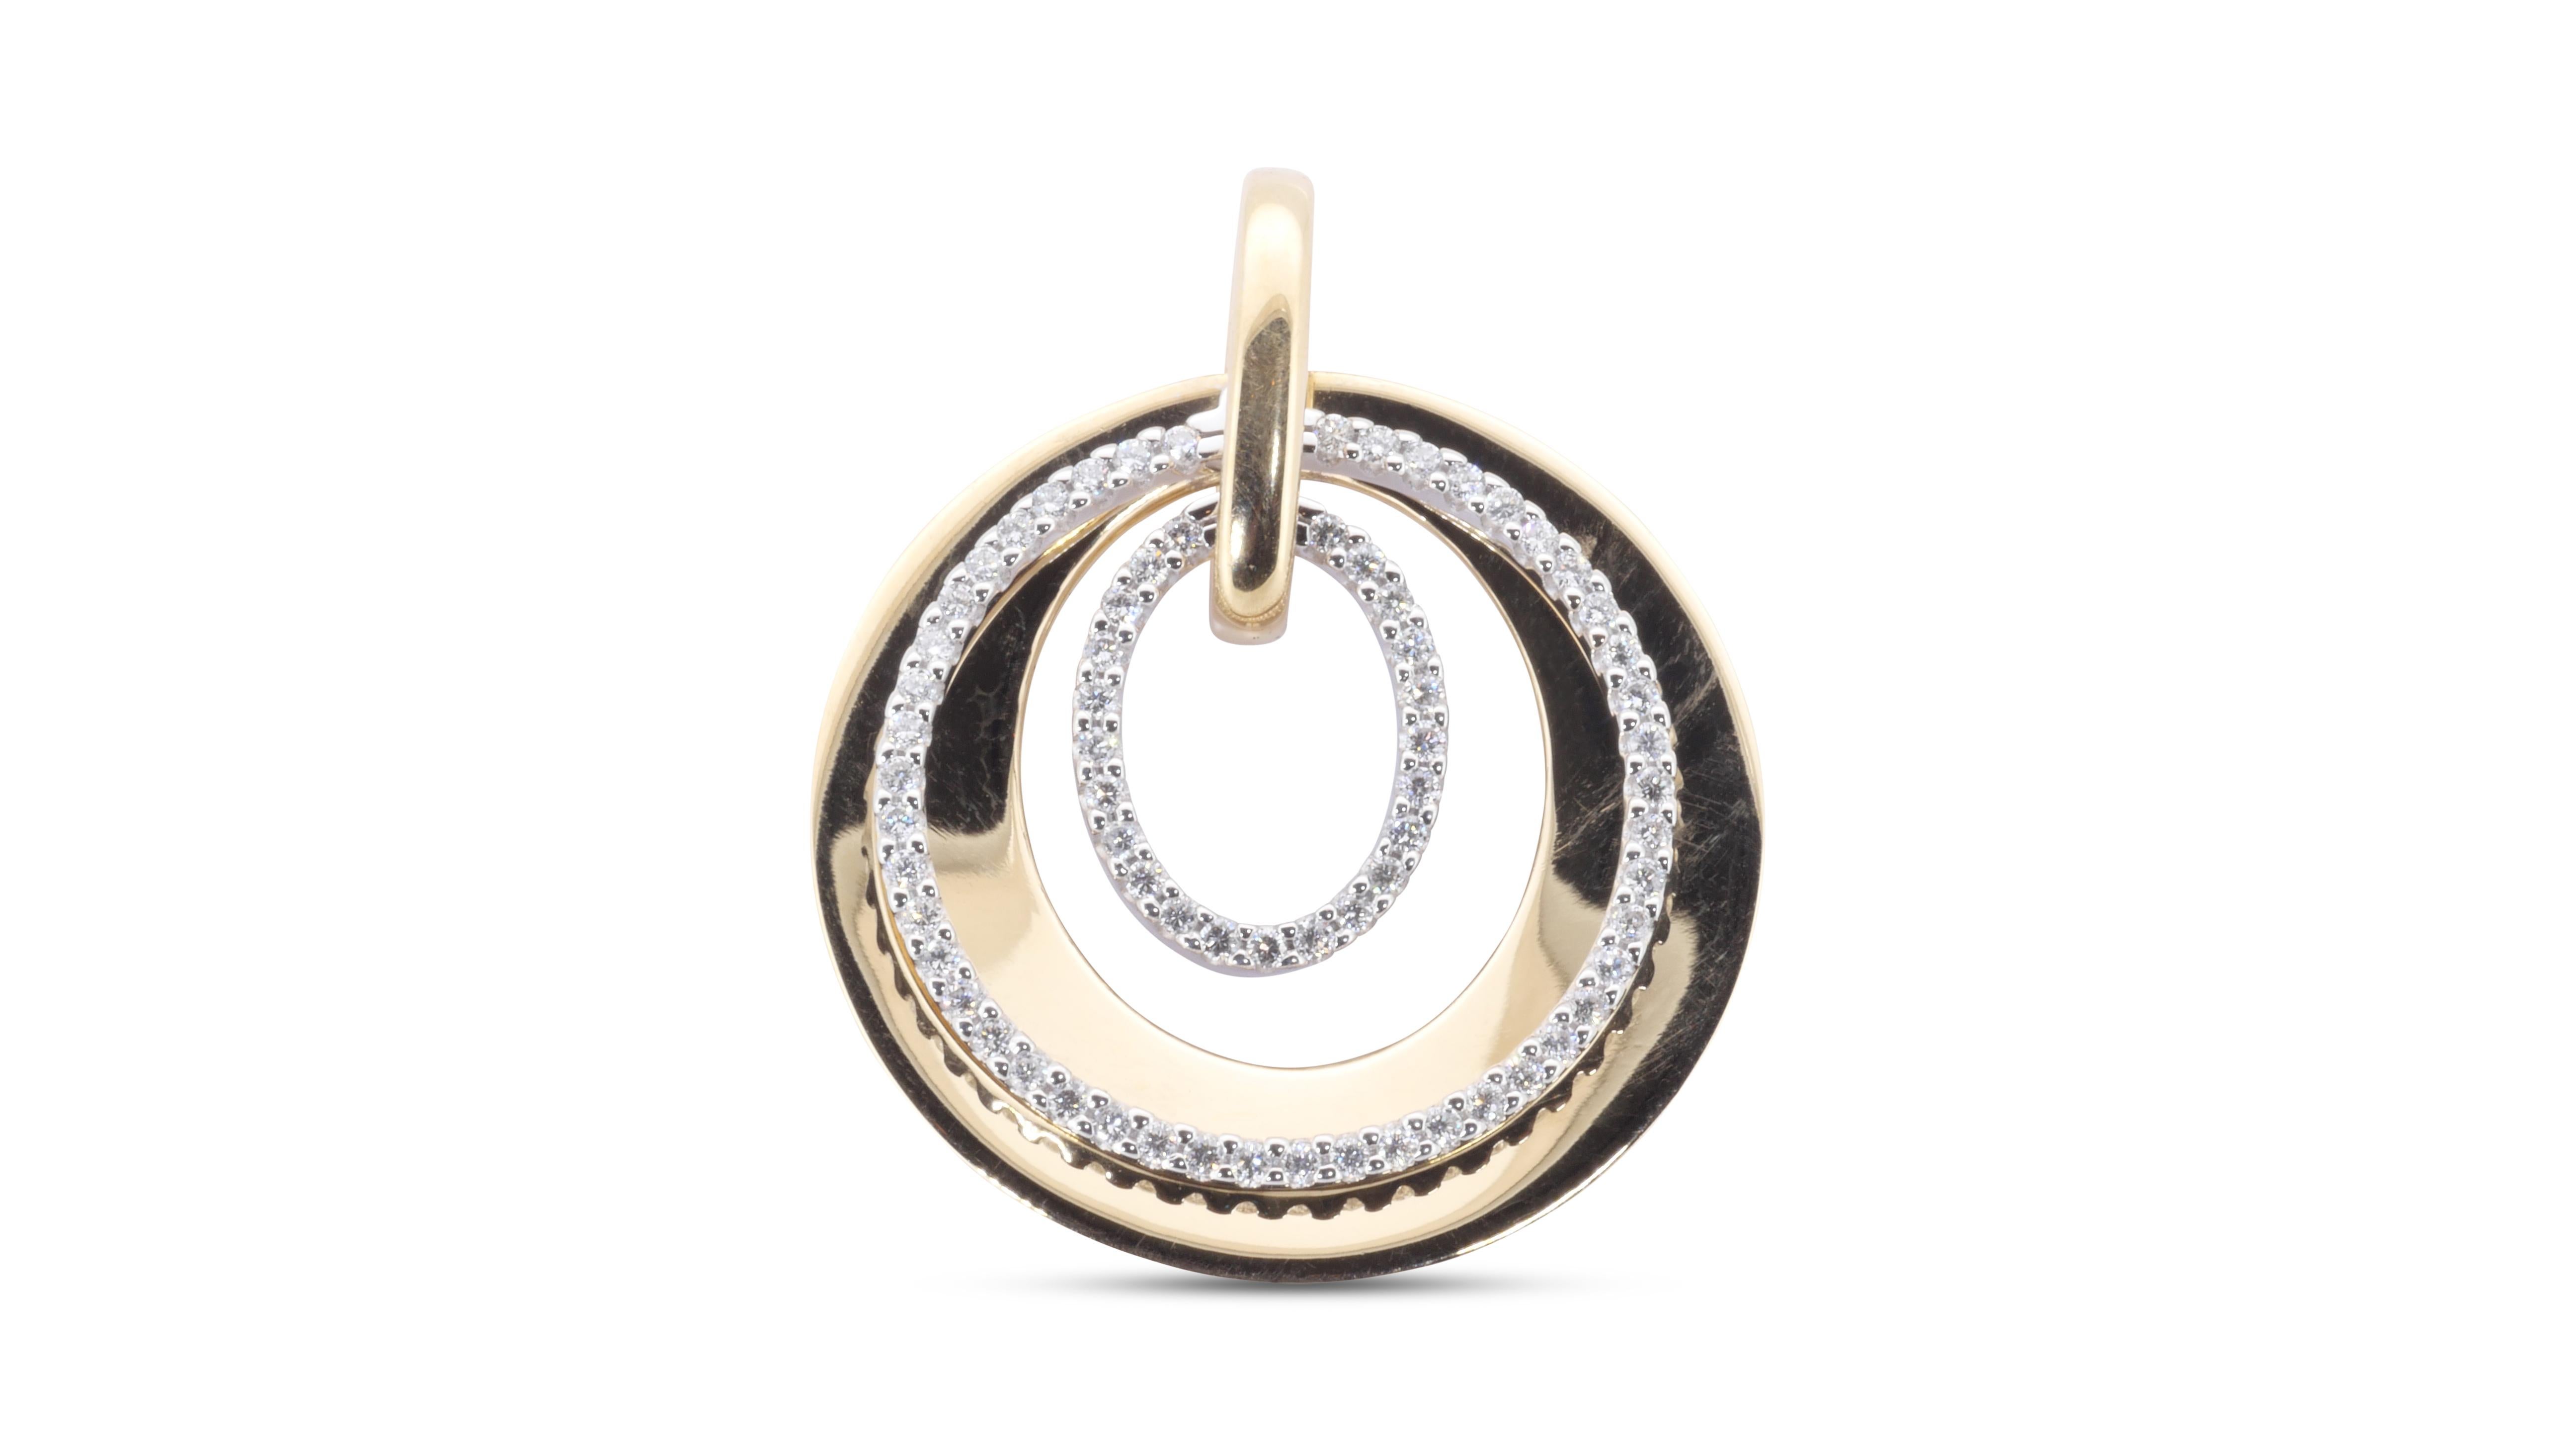 A beautiful pendant with a dazzling 4.6 carat round brilliant diamonds. The jewelry is made of 18k Yellow Gold with a high quality polish. It comes with a nice jewelry box.

70 diamonds main stone of 4.6 carat
cut: round brilliant
color: